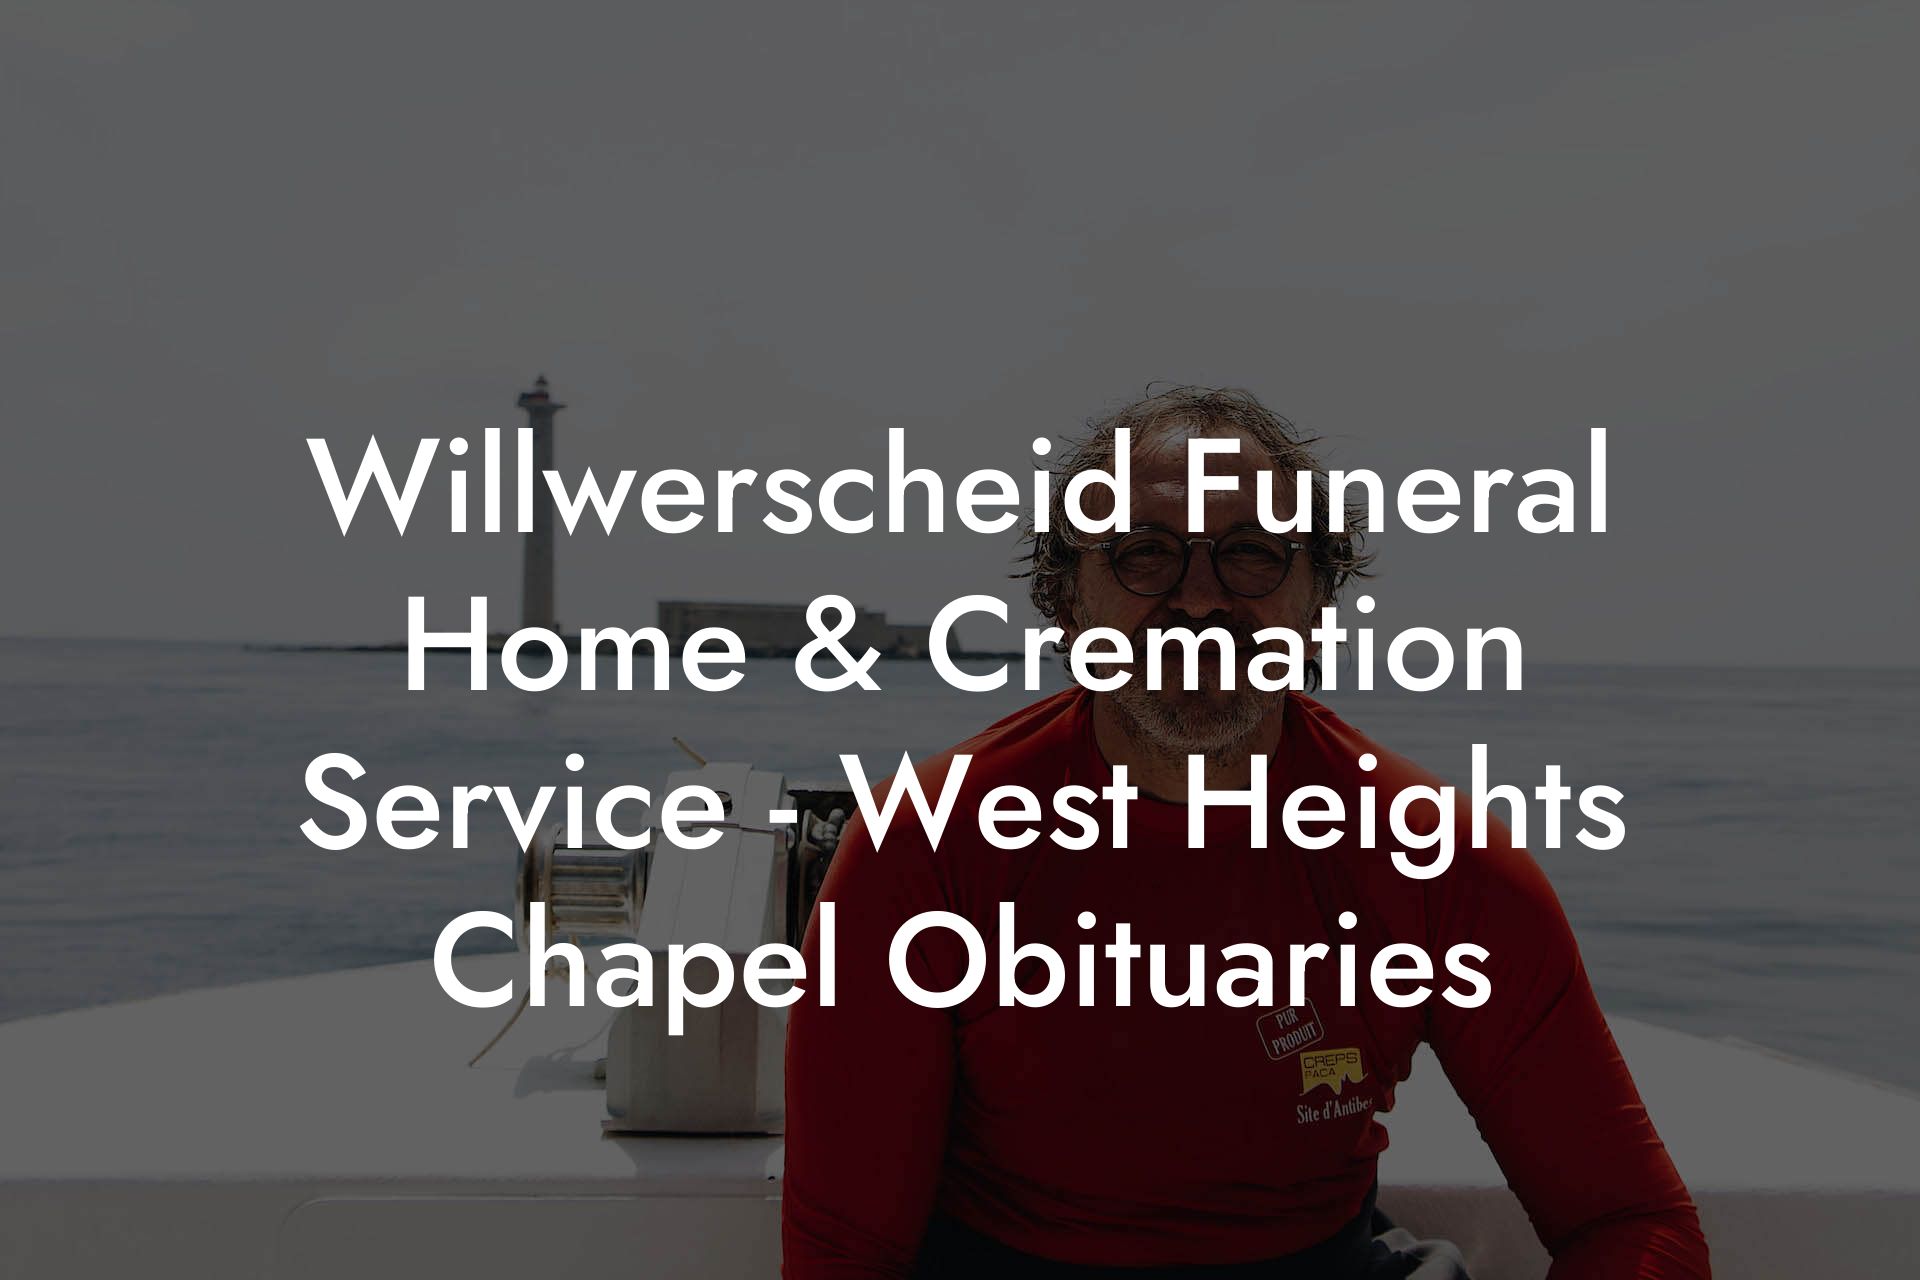 Willwerscheid Funeral Home & Cremation Service - West Heights Chapel Obituaries